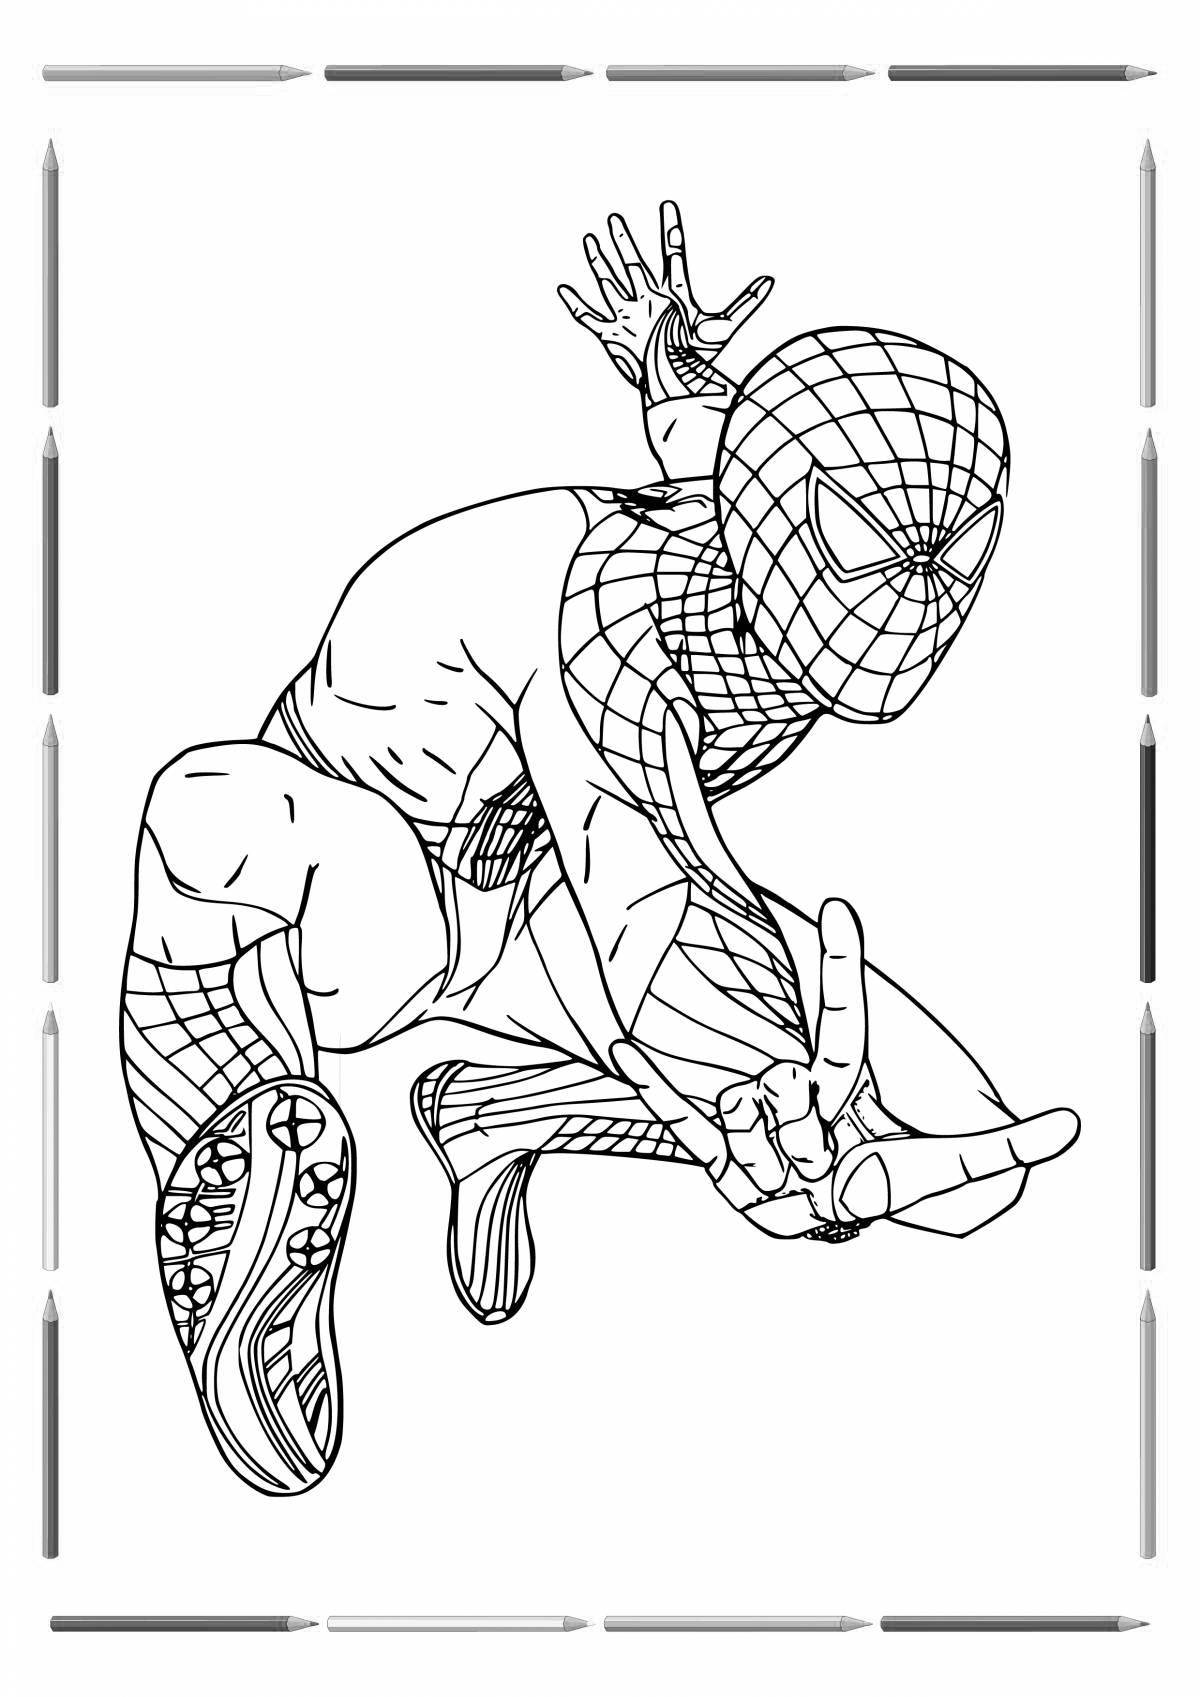 The incredible spiderman coloring pages for kids